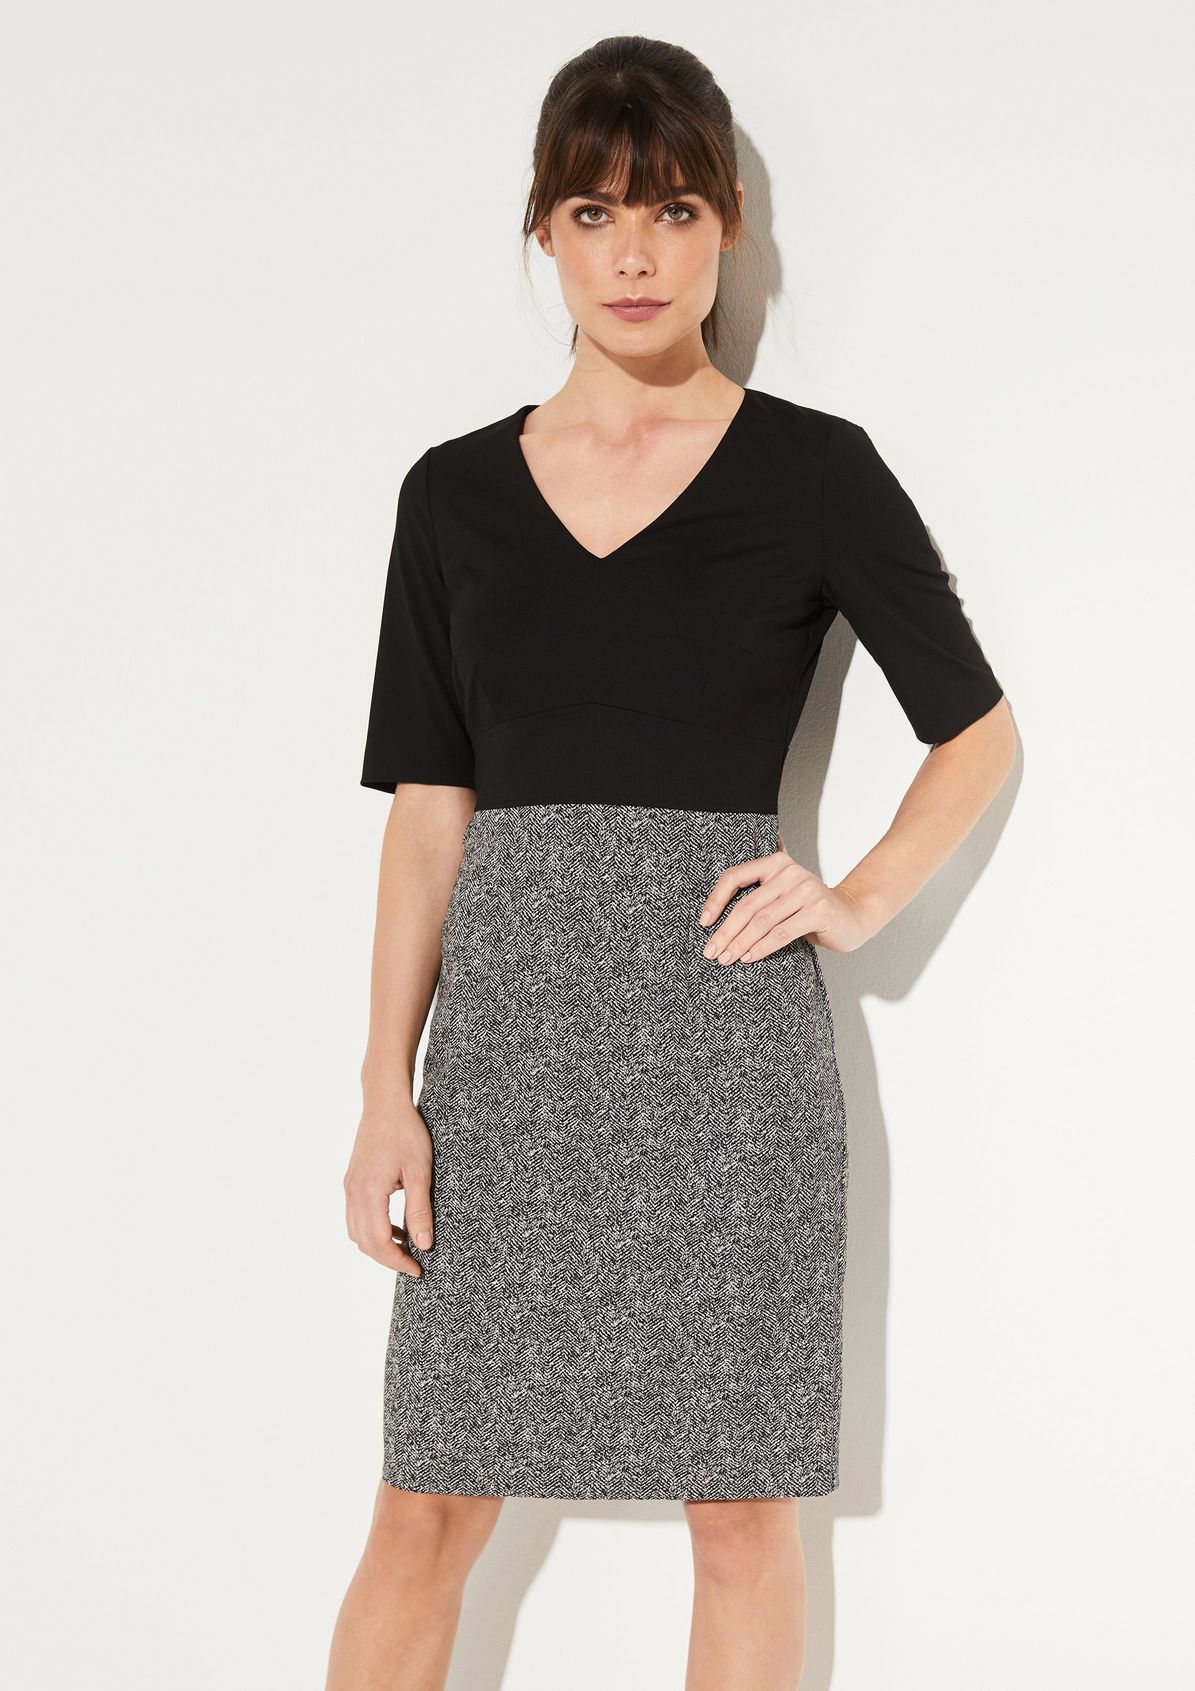 Business dress with a houndstooth pattern from comma